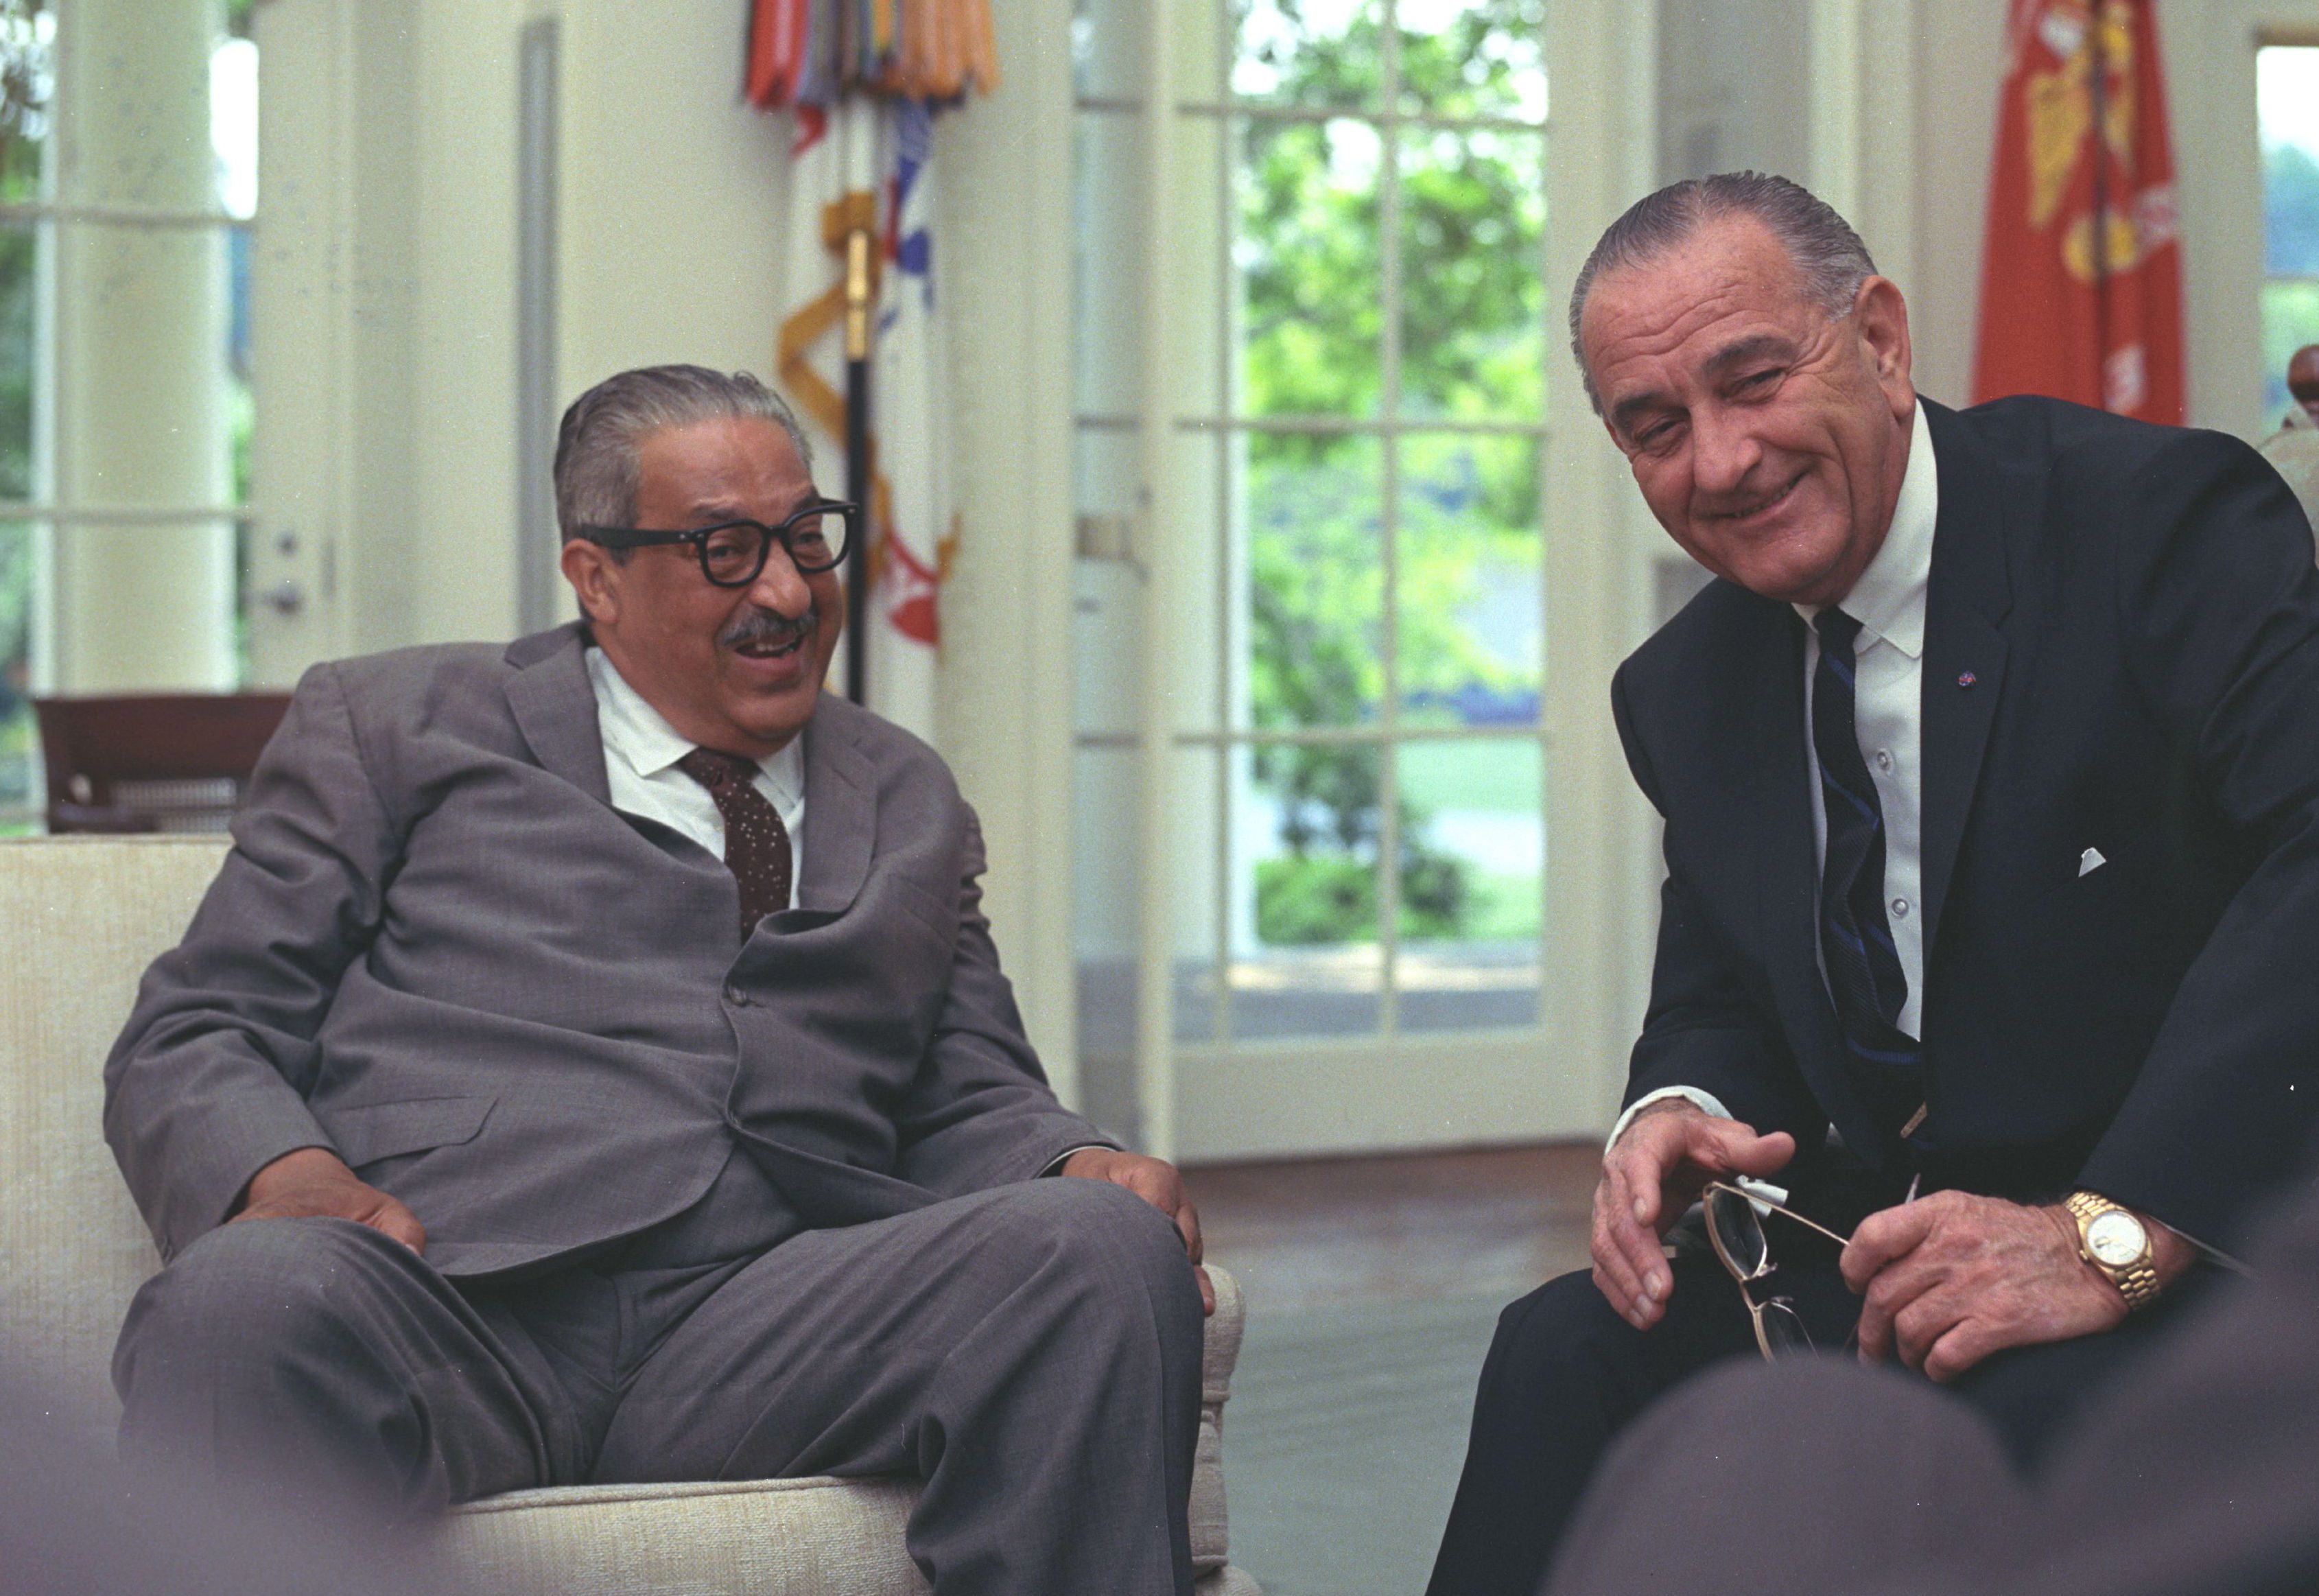 history-calling-lbj-and-thurgood-marshall-on-the-telephone-not-even-past